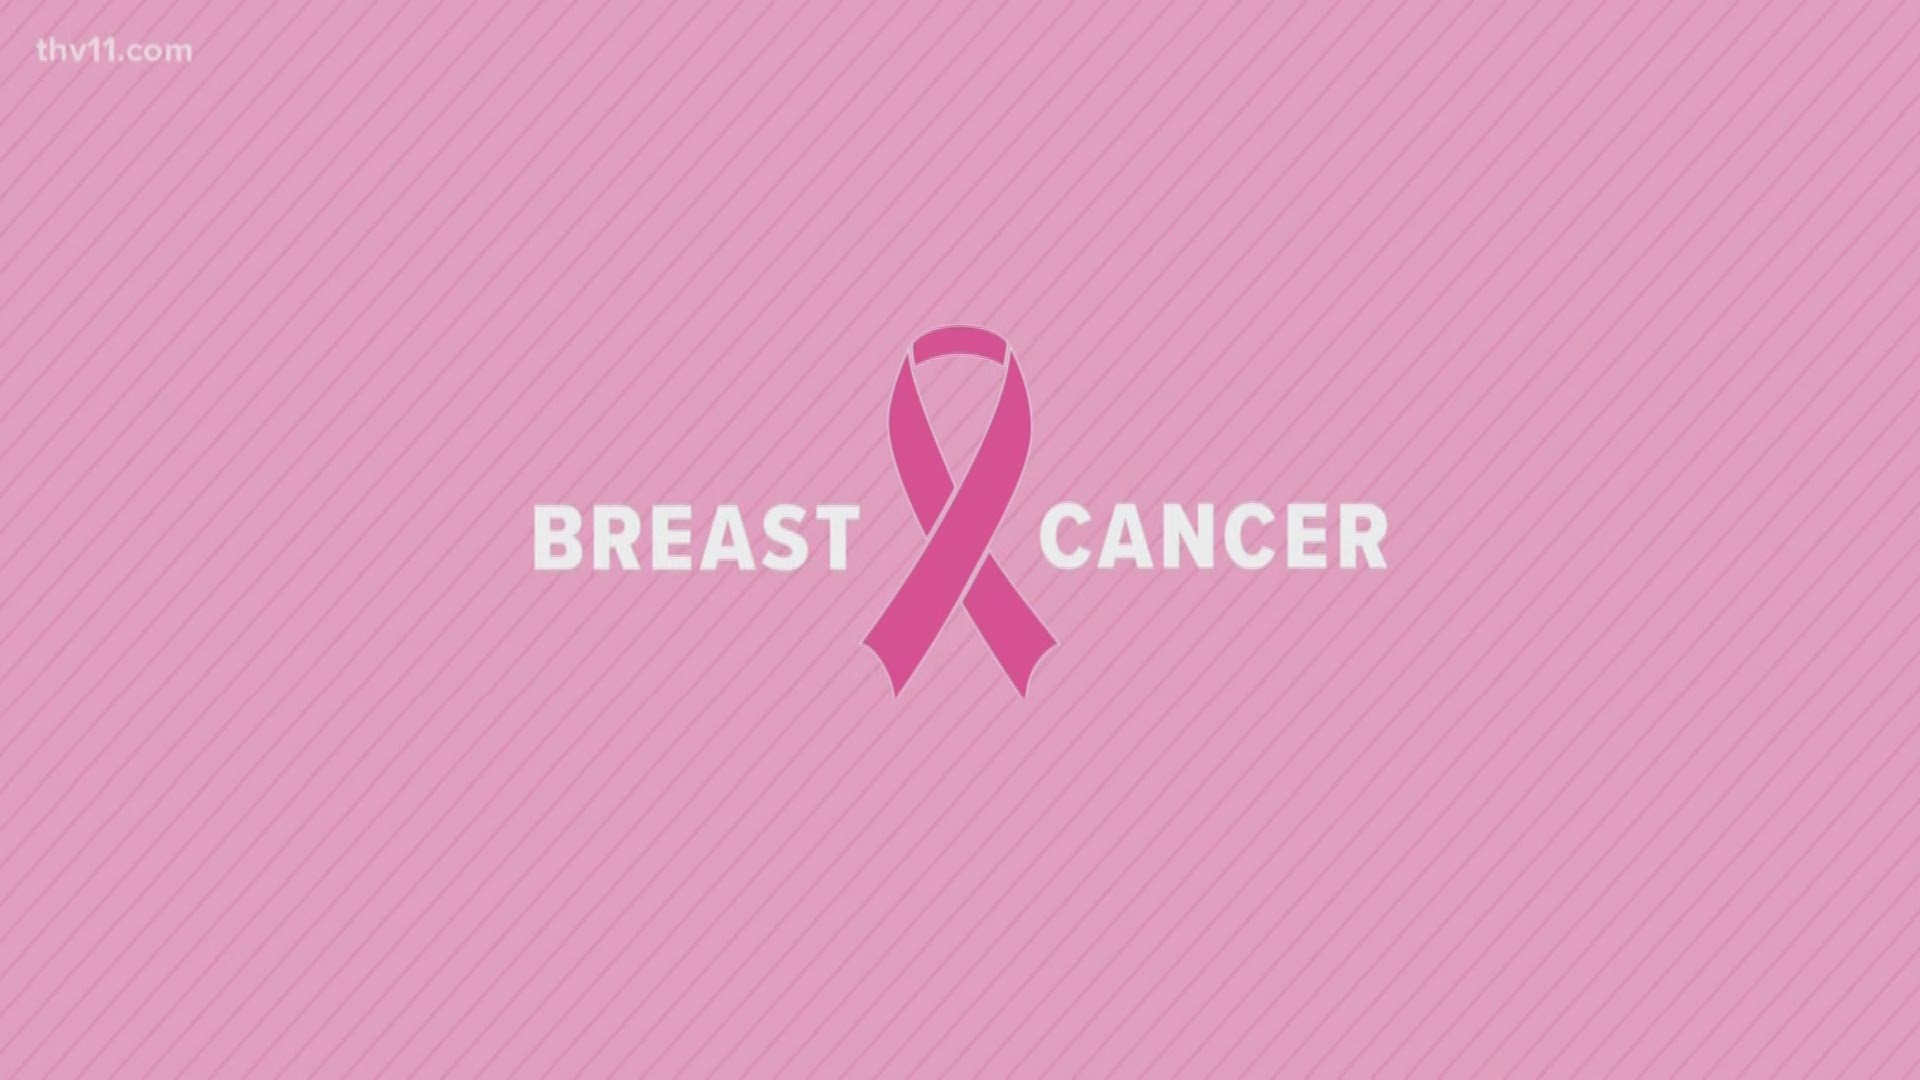 Susan G. Komen Arkansas' goal is to bust myths about mammograms and break down barriers that make it hard for women to get them.